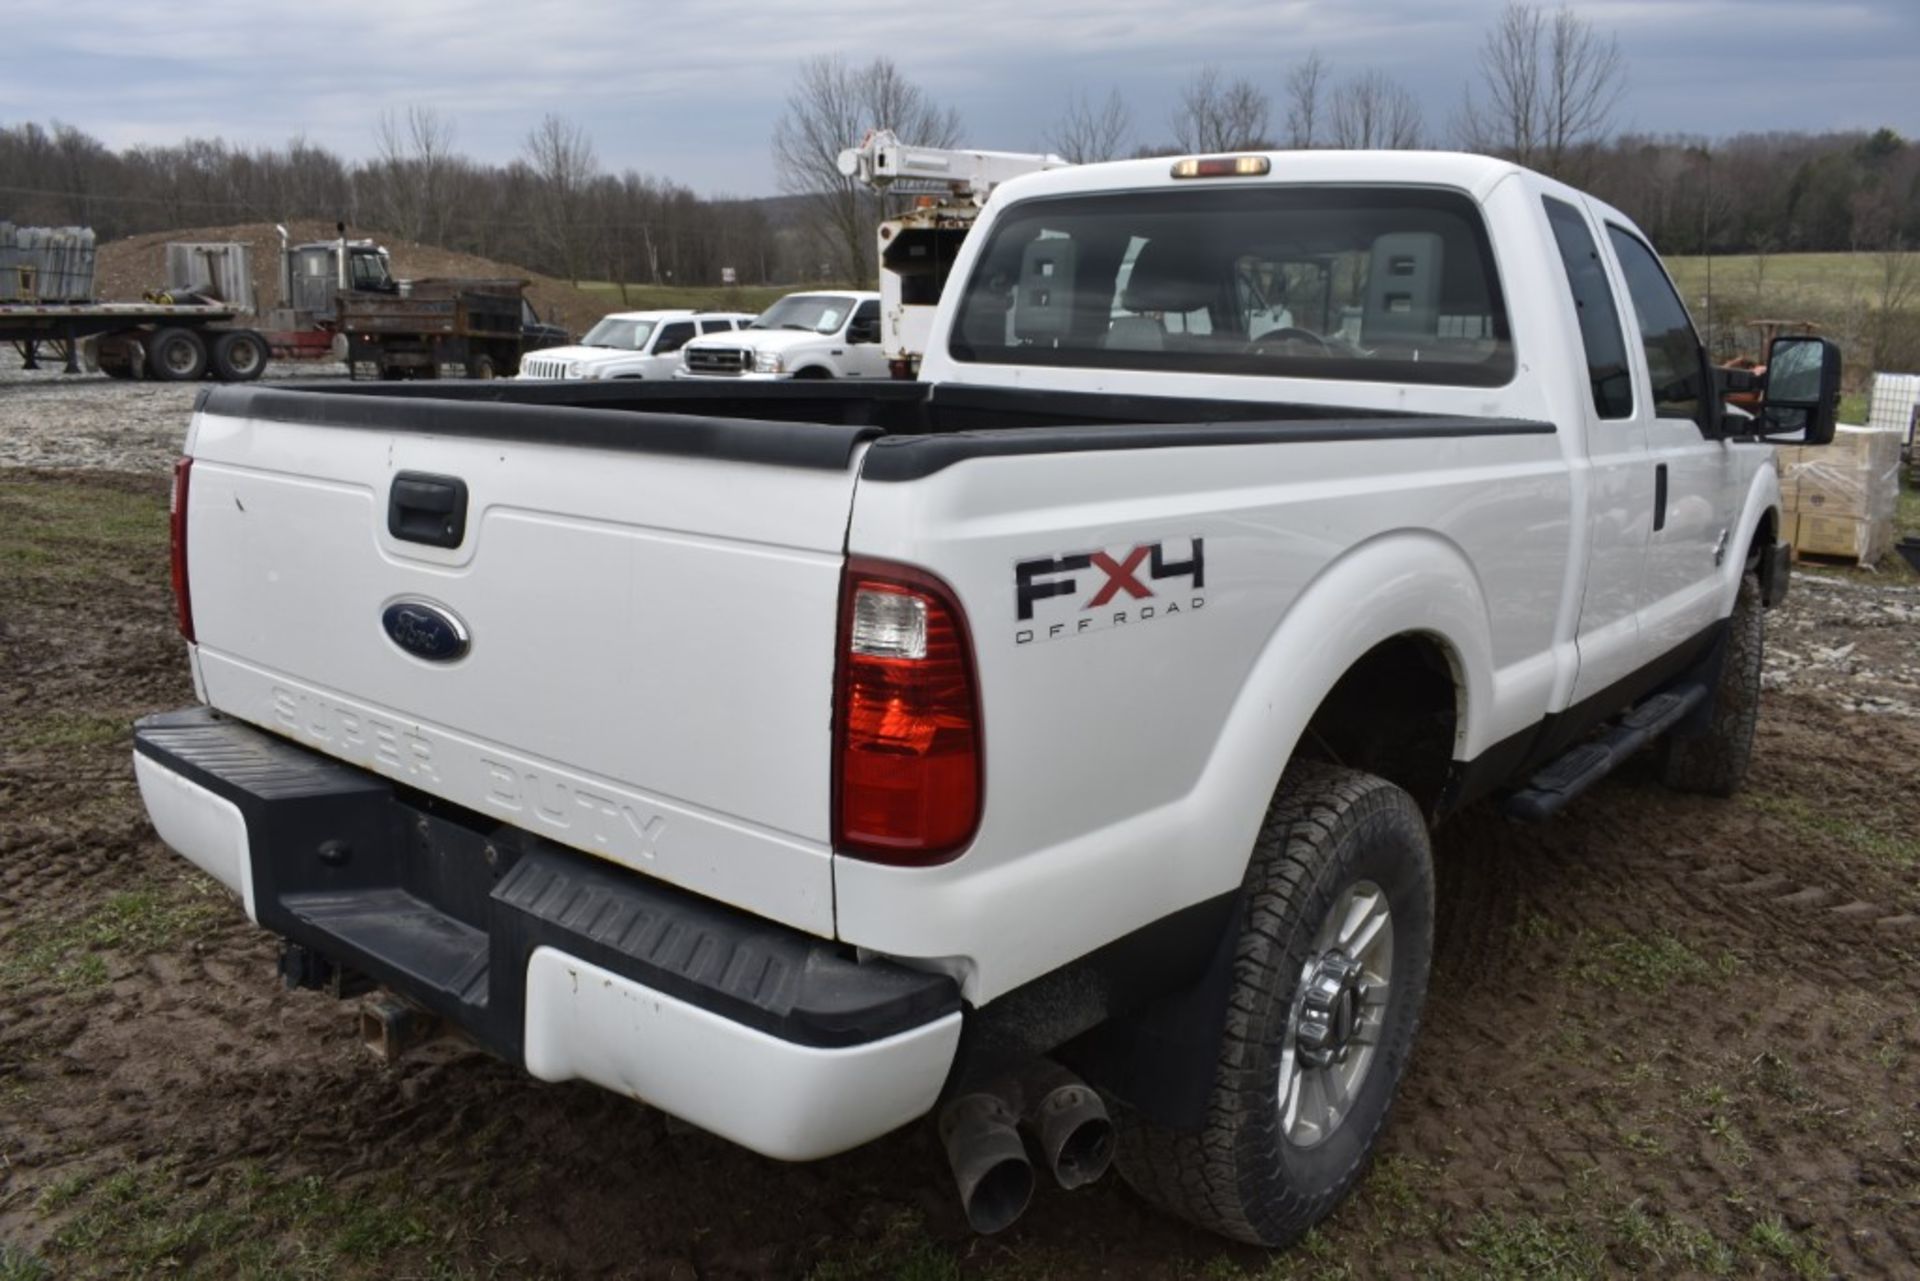 2011 Ford F-250 Super Duty Truck - Image 12 of 40